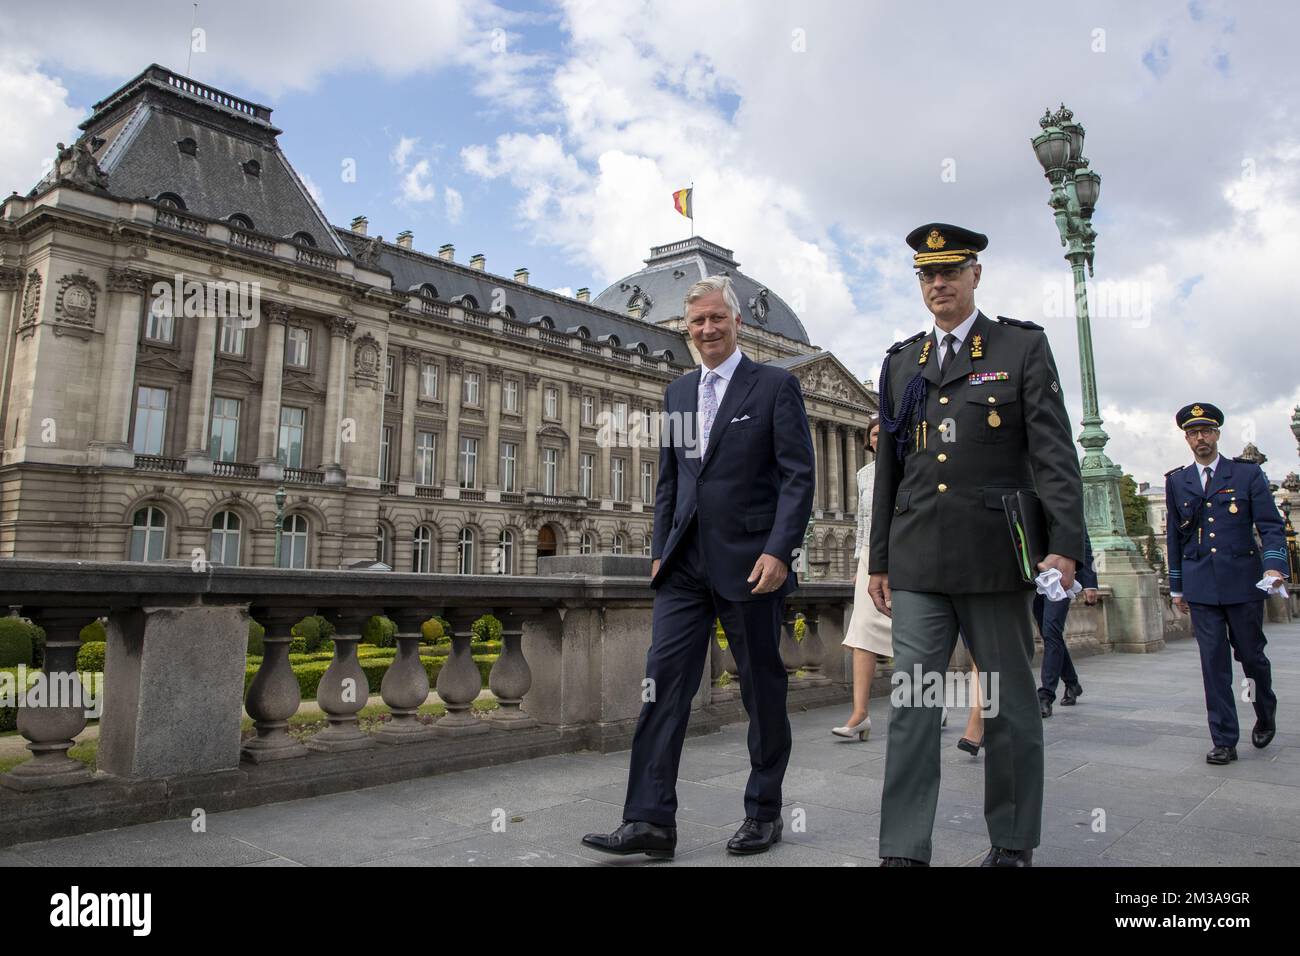 King Philippe - Filip of Belgium (L) arrives for a ceremony to award the 'Francqui Prize' scientifi awards for 2021 and 2022, Wednesday 01 June 2022 in Brussels. The 2021 prize is awarded to ULiege astrologist Michael Gillon, ULiege's Veerle Rots will receive the 2022 one for her Palaeolithic Stone Tool Hafting research. The scientific prize, which is often referred to as the 'Belgian Nobel Prize', is awarded by The Francqui Foundation and is worth 250.000 euros. BELGA PHOTO NICOLAS MAETERLINCK Stock Photo